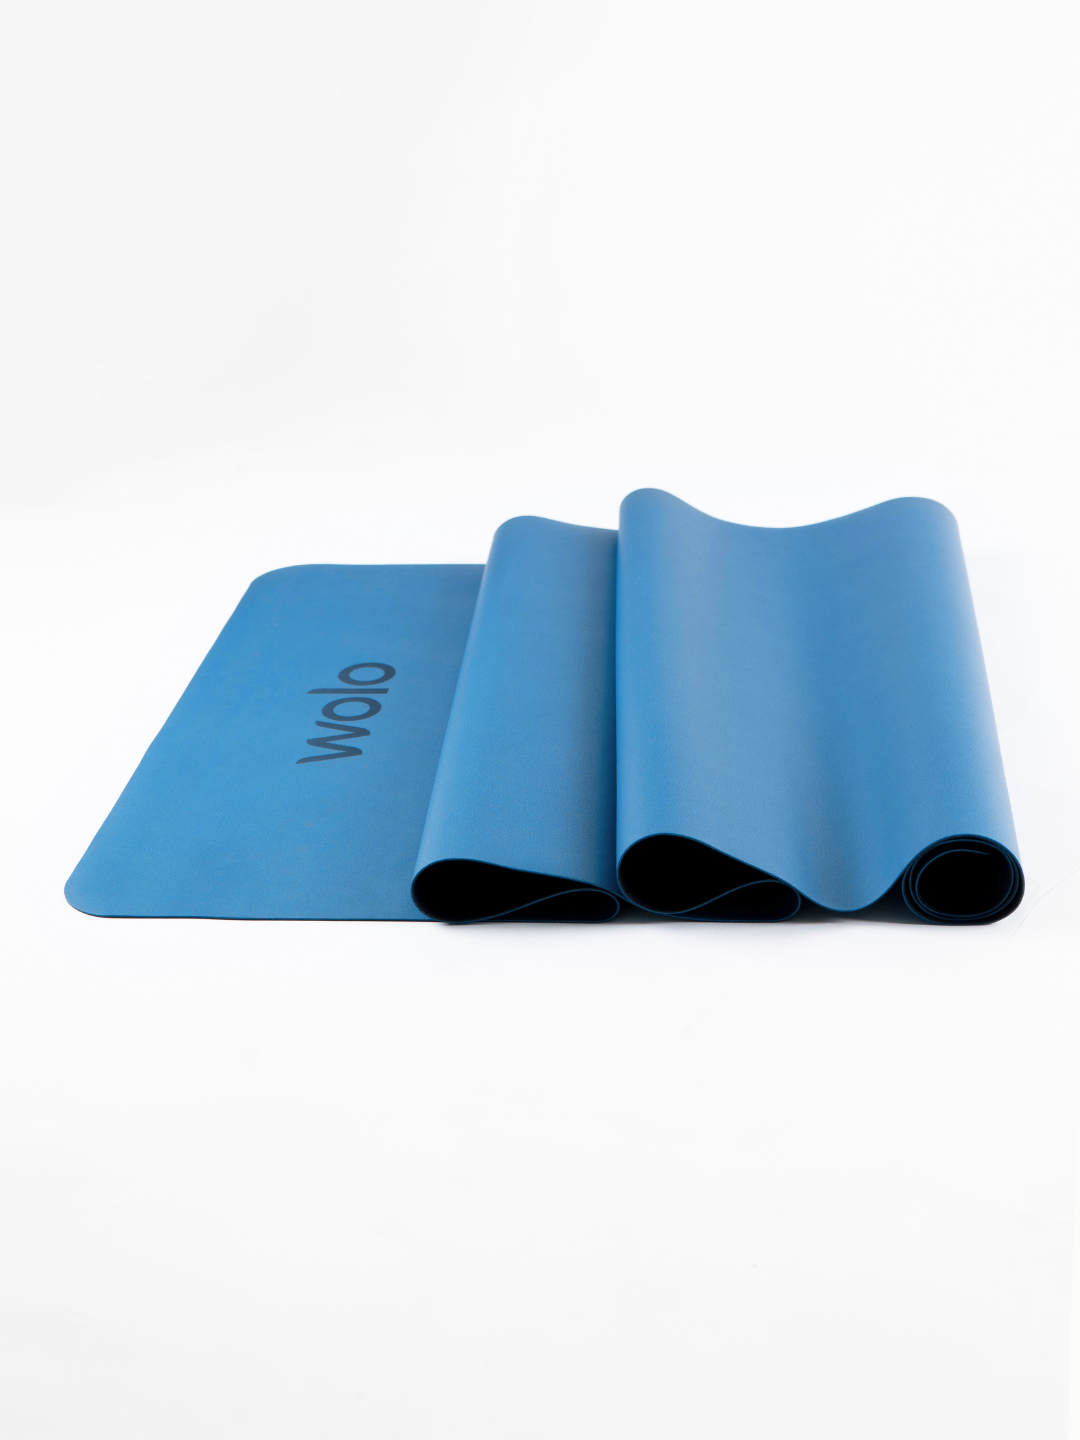 Close-up view of an Ocean blue foldable travel yoga mat